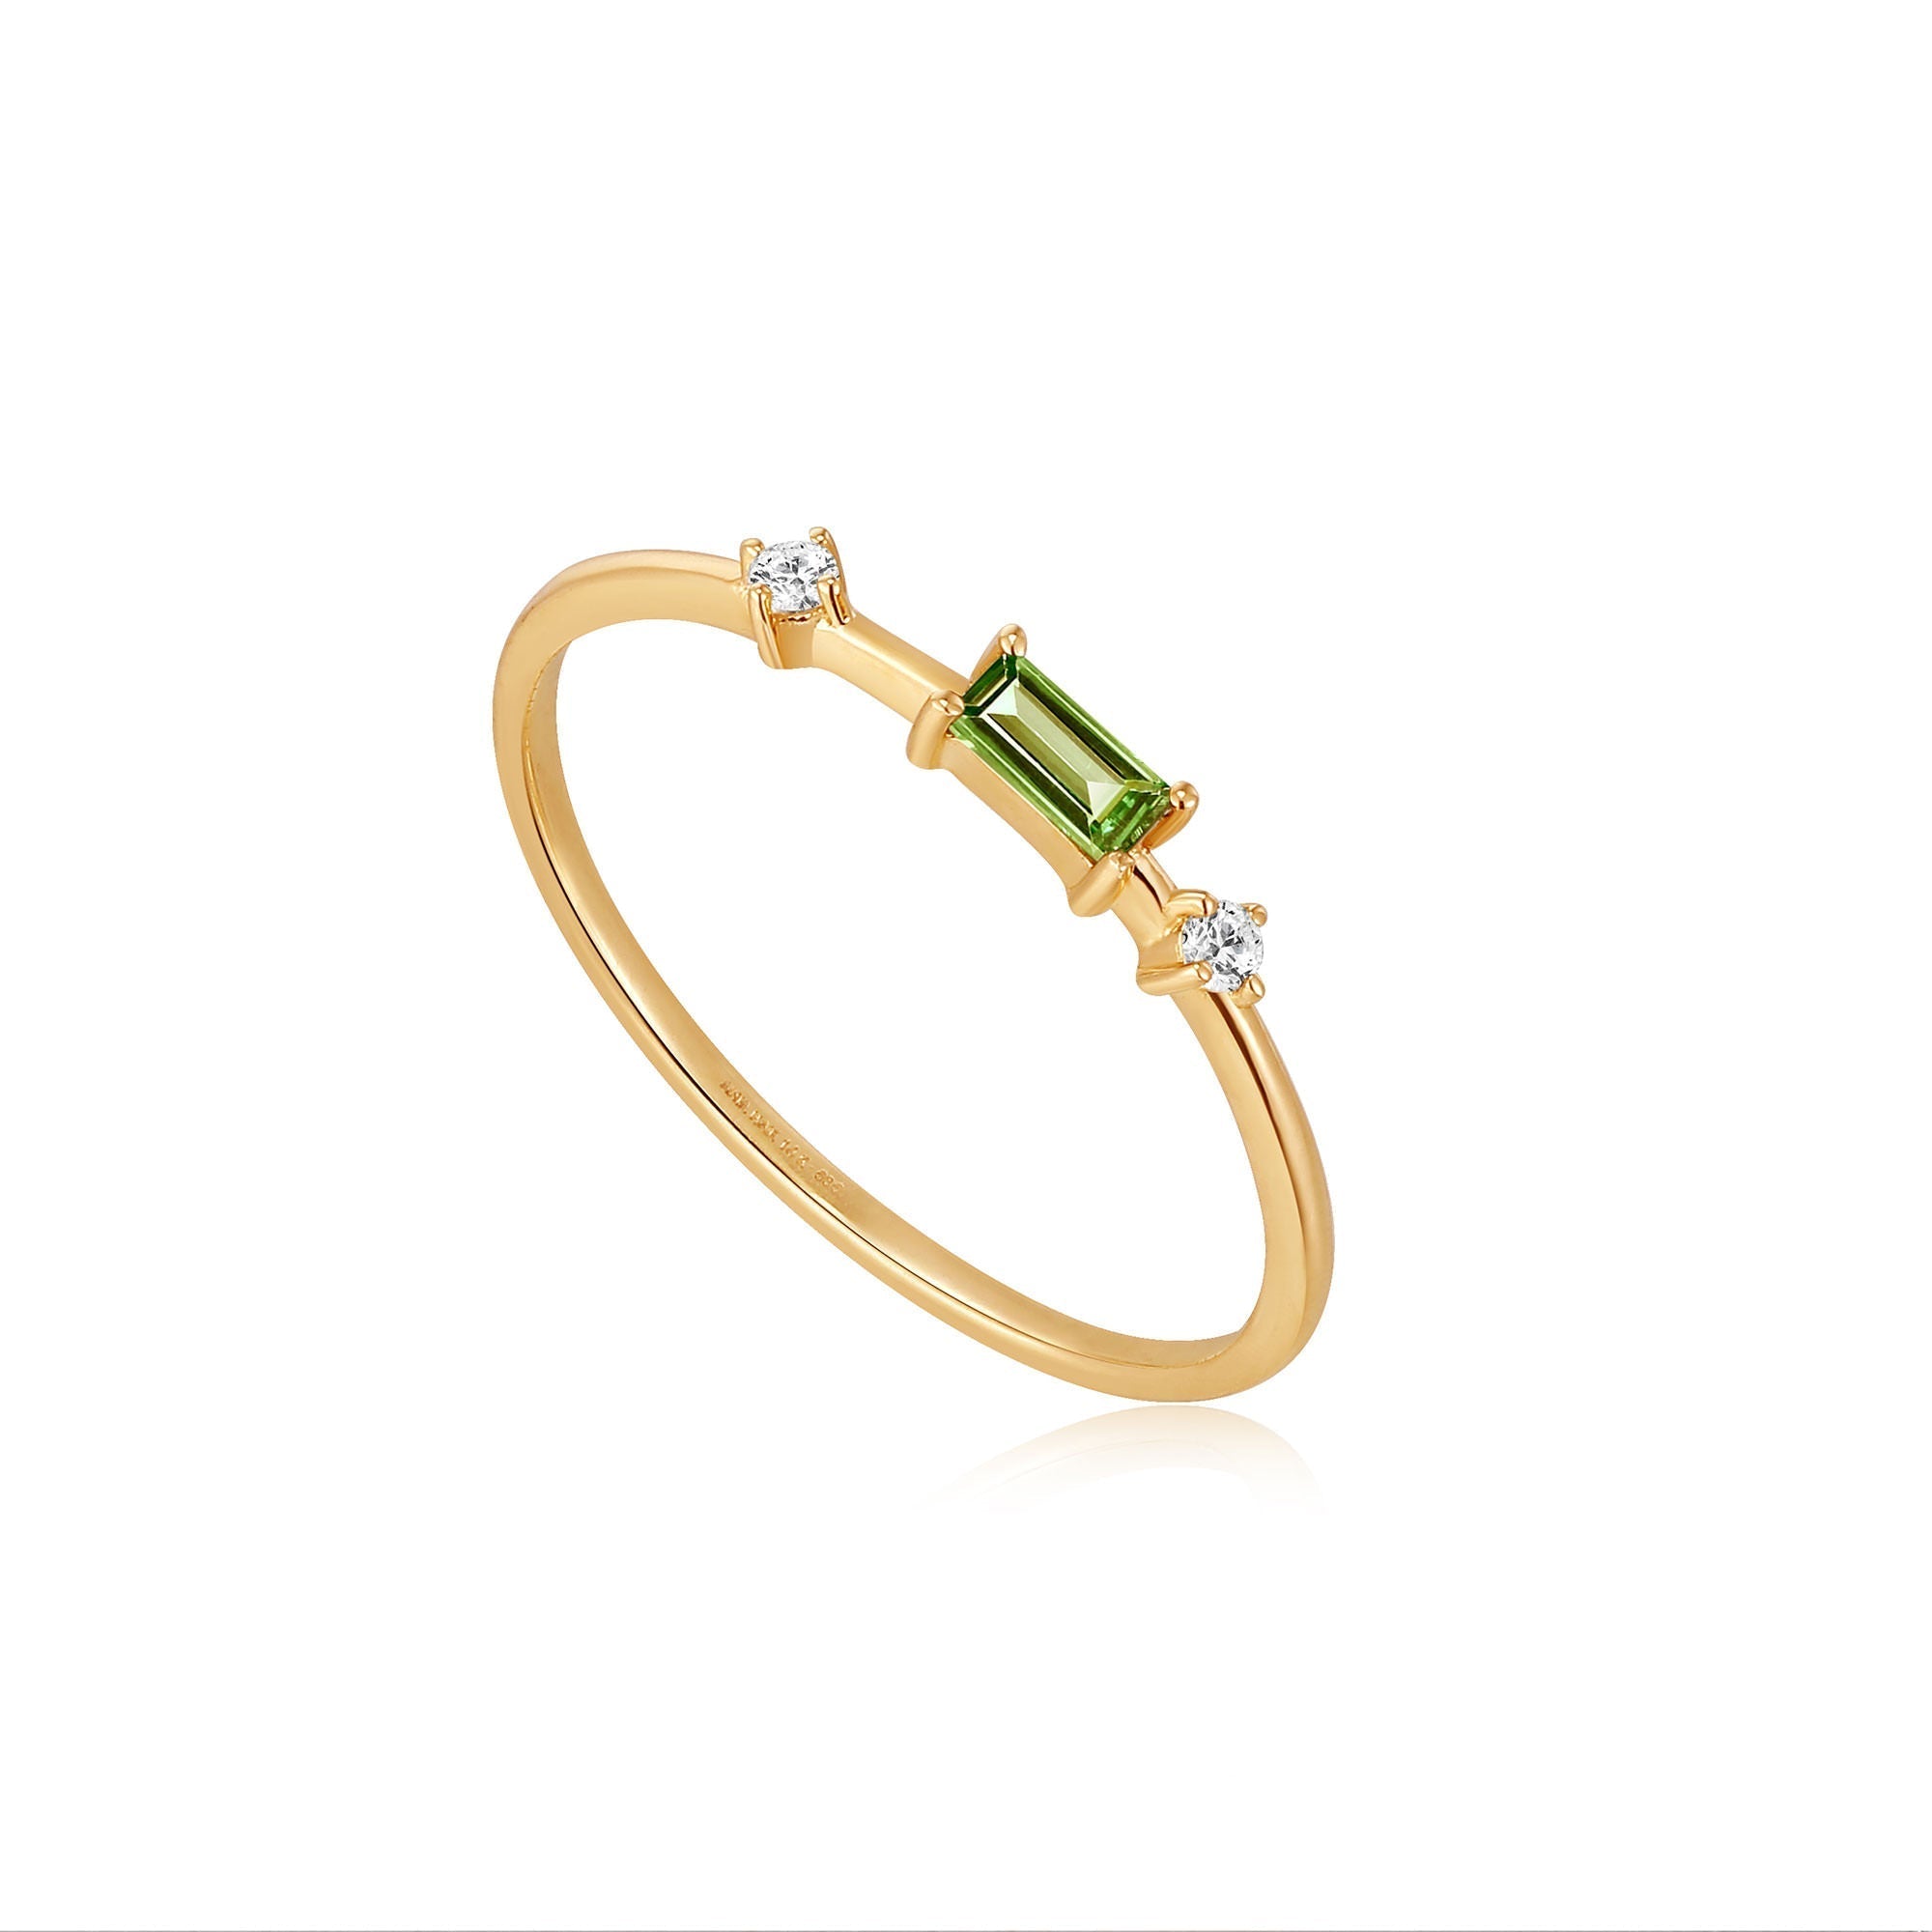 Ania Haie 14ct Gold Tourmaline and White Sapphire Ring